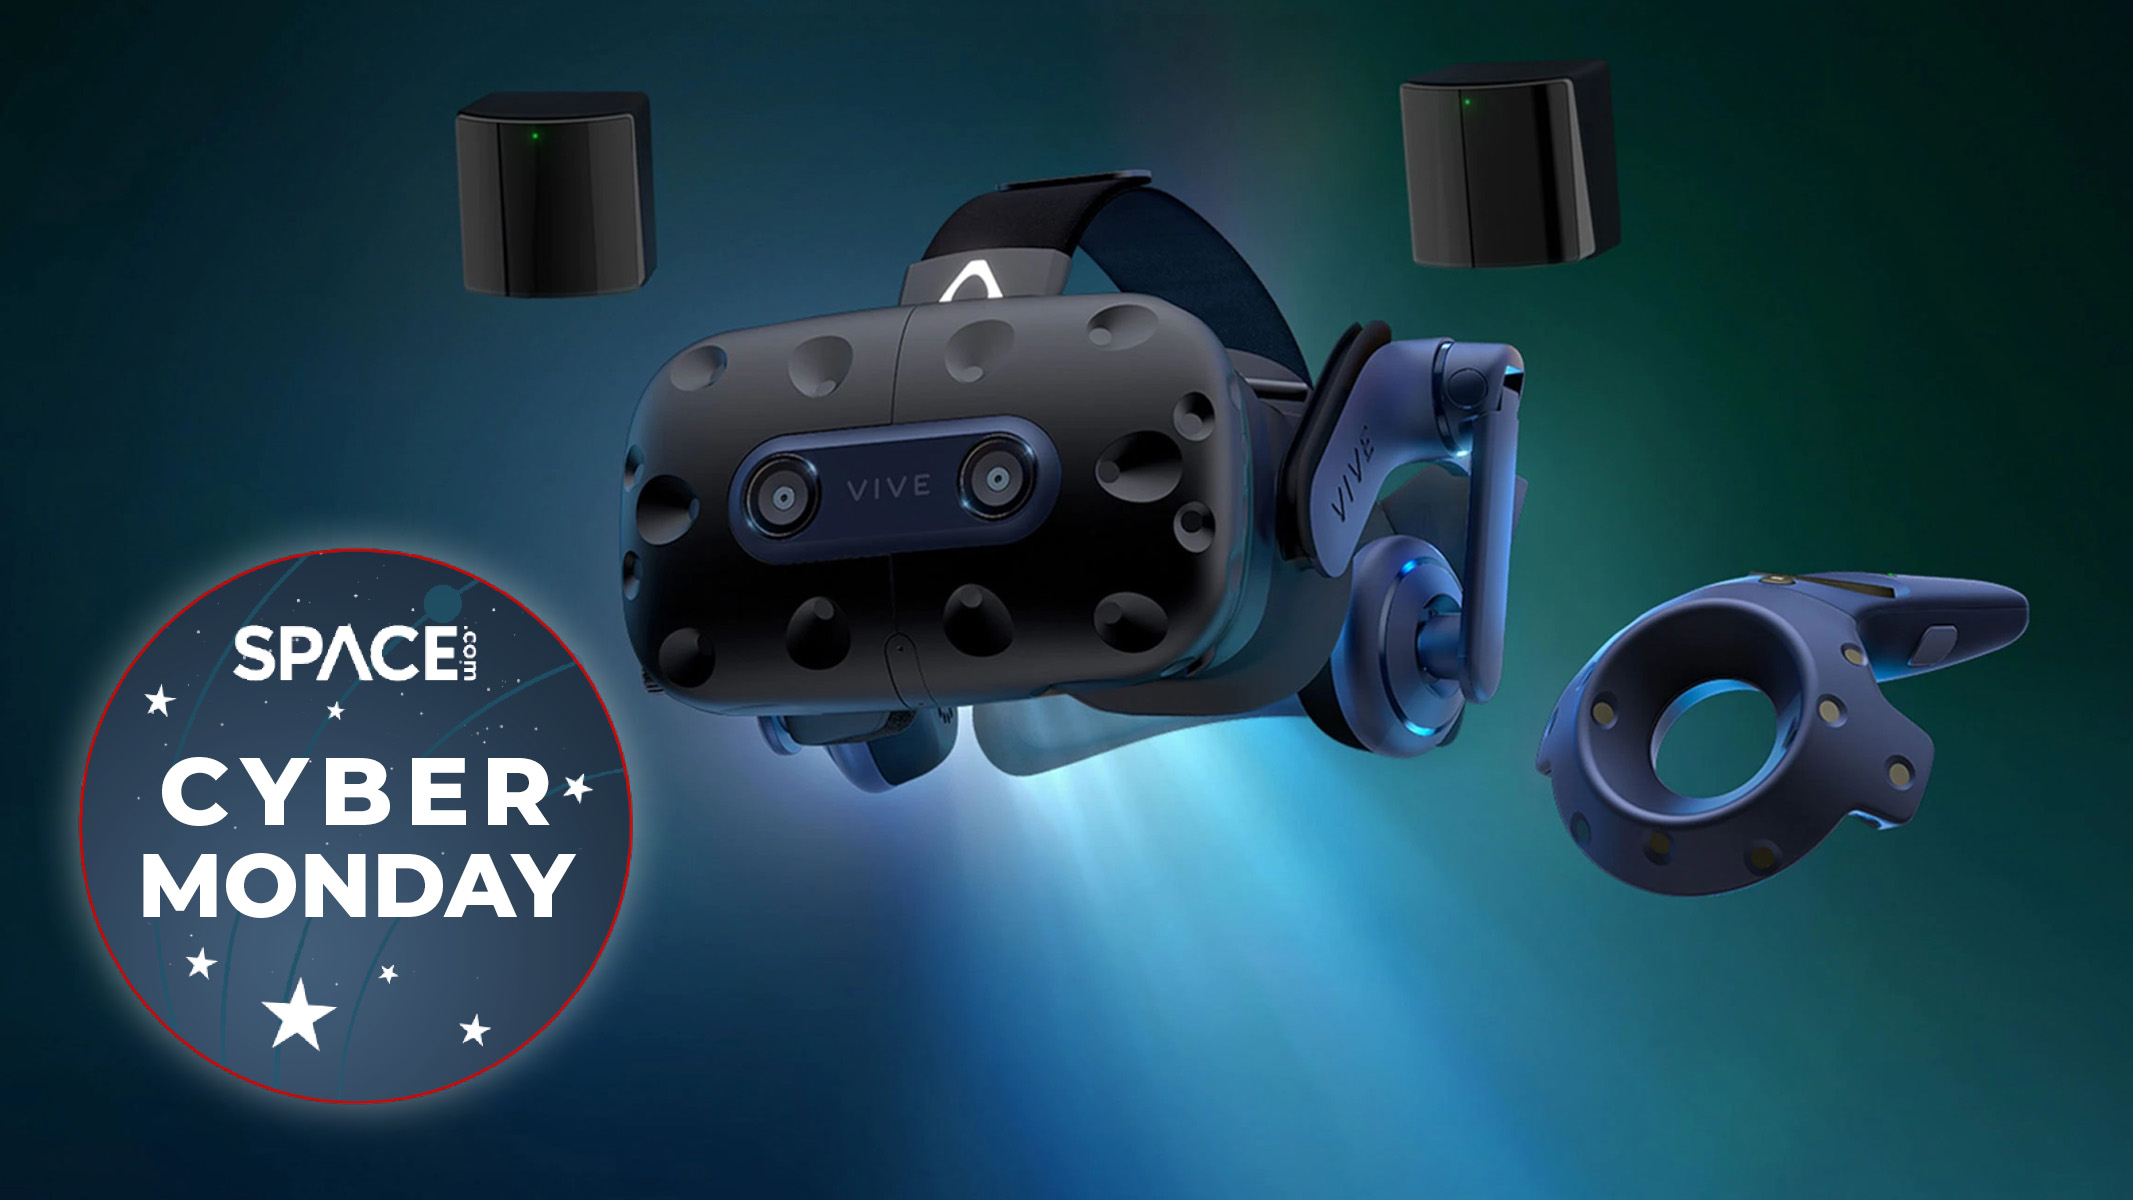 Hurry! You can still save $400 on an HTC VIVE Pro 2 VR headset for Cyber Monday Space